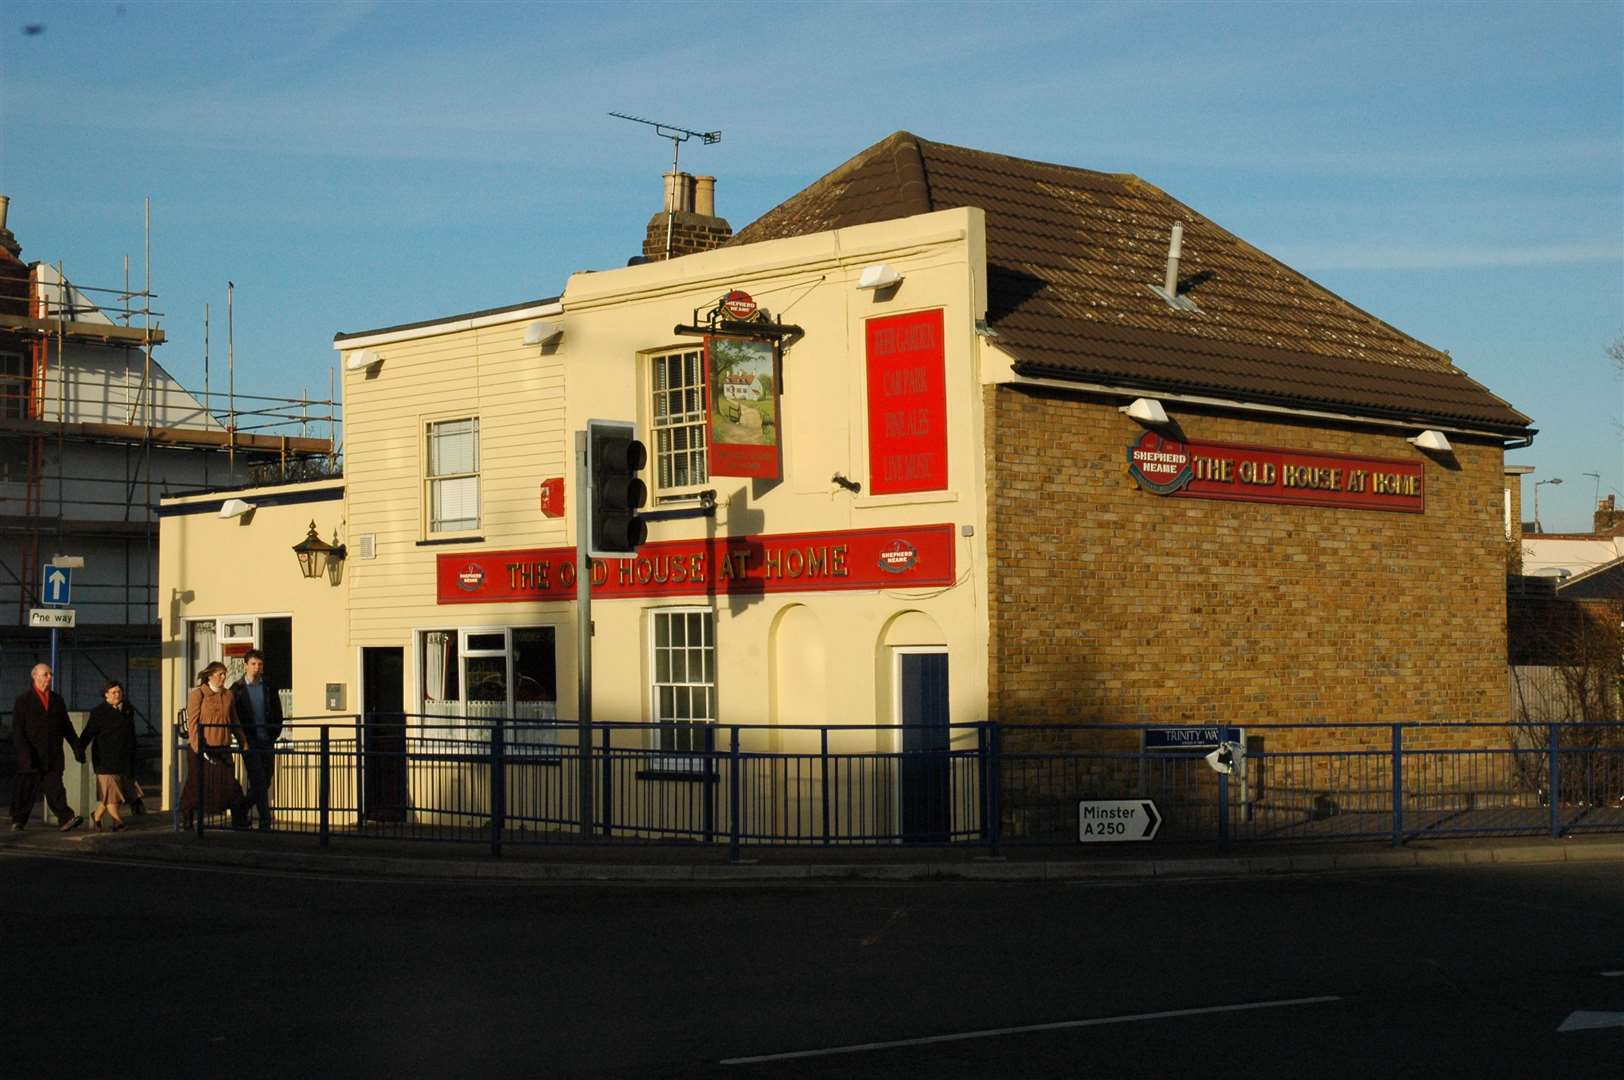 The Old House at Home, pictured on 2008 when it was one of three Sheerness pubs for which brewer Shepherd Neame was seeking new tenants